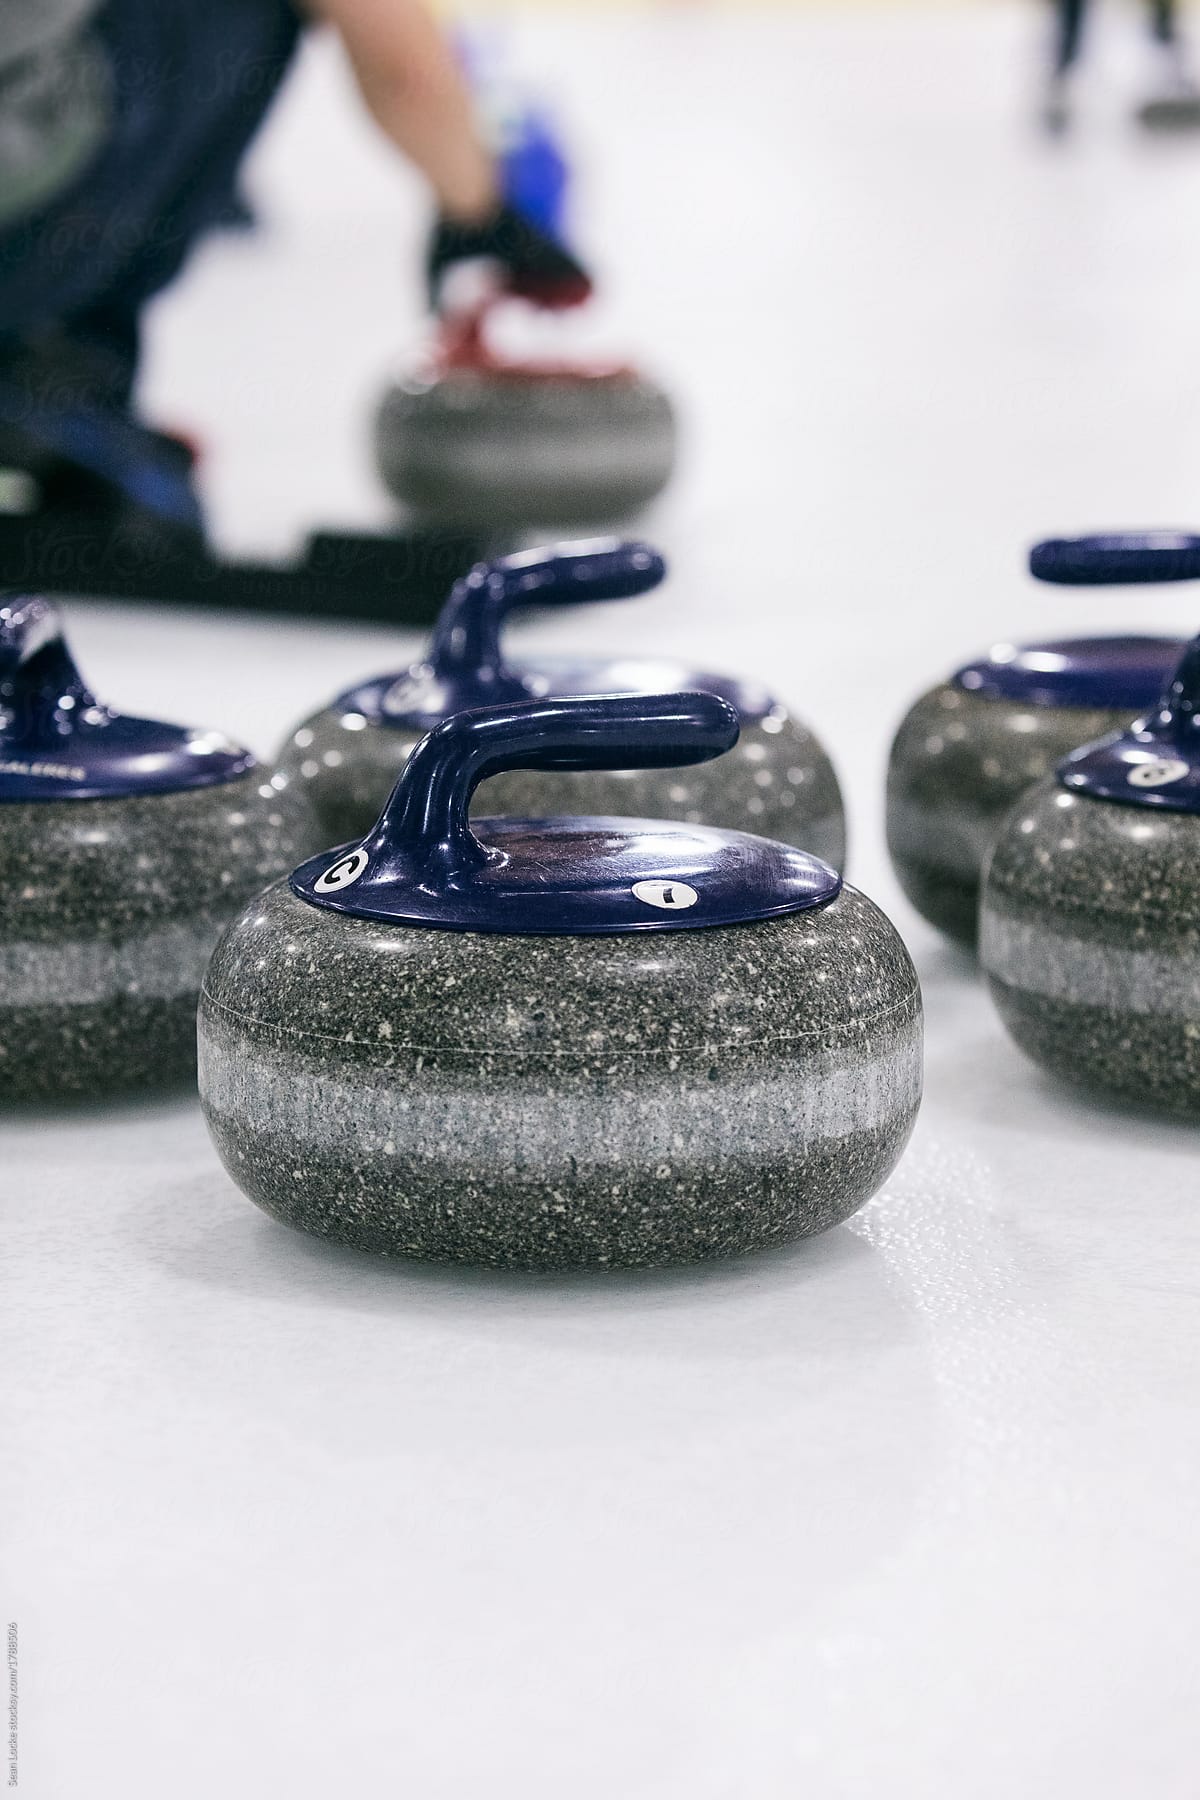 Curling: Stones Wait To Be Thrown